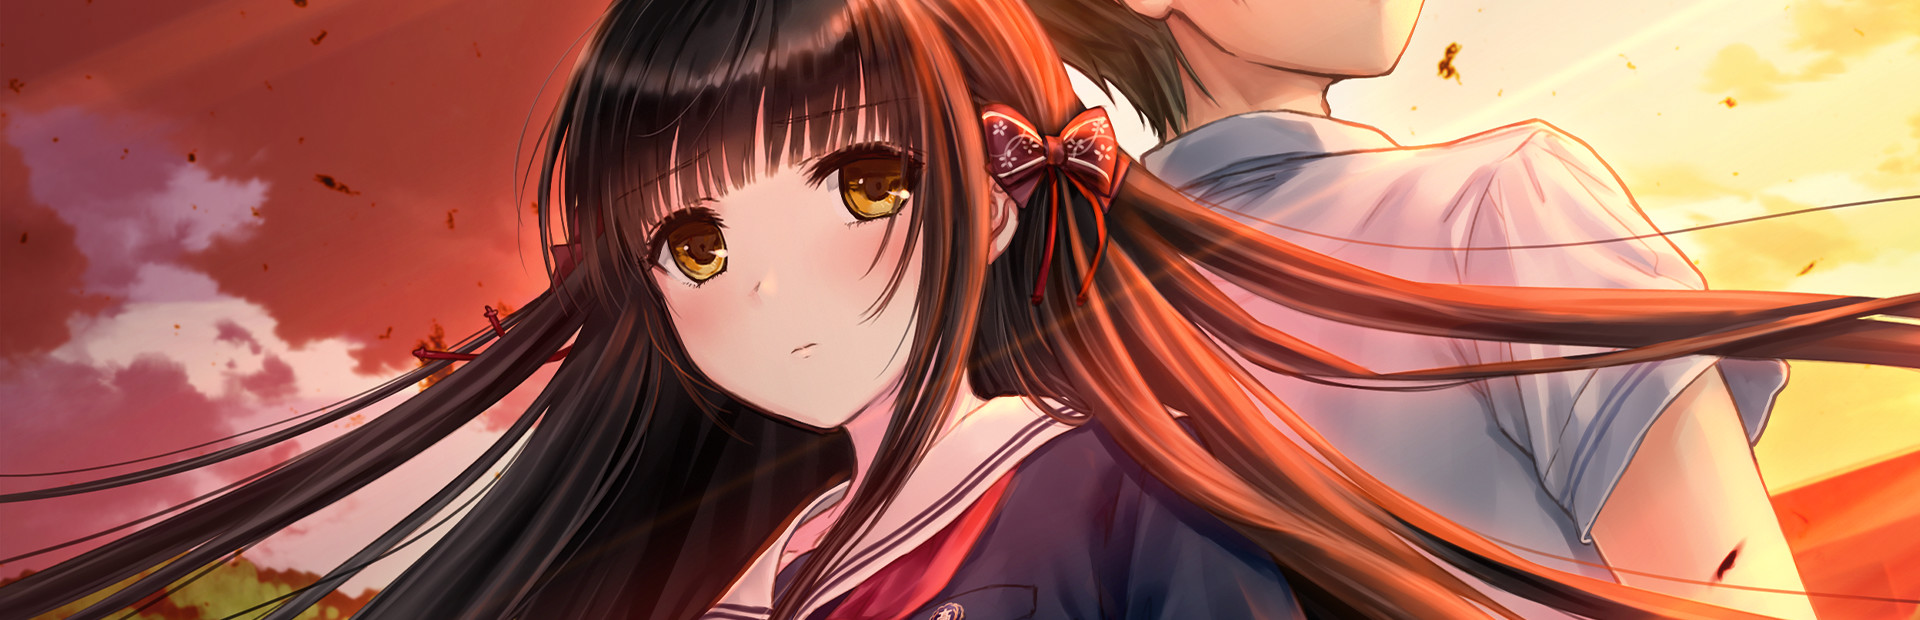 Iwaihime cover image